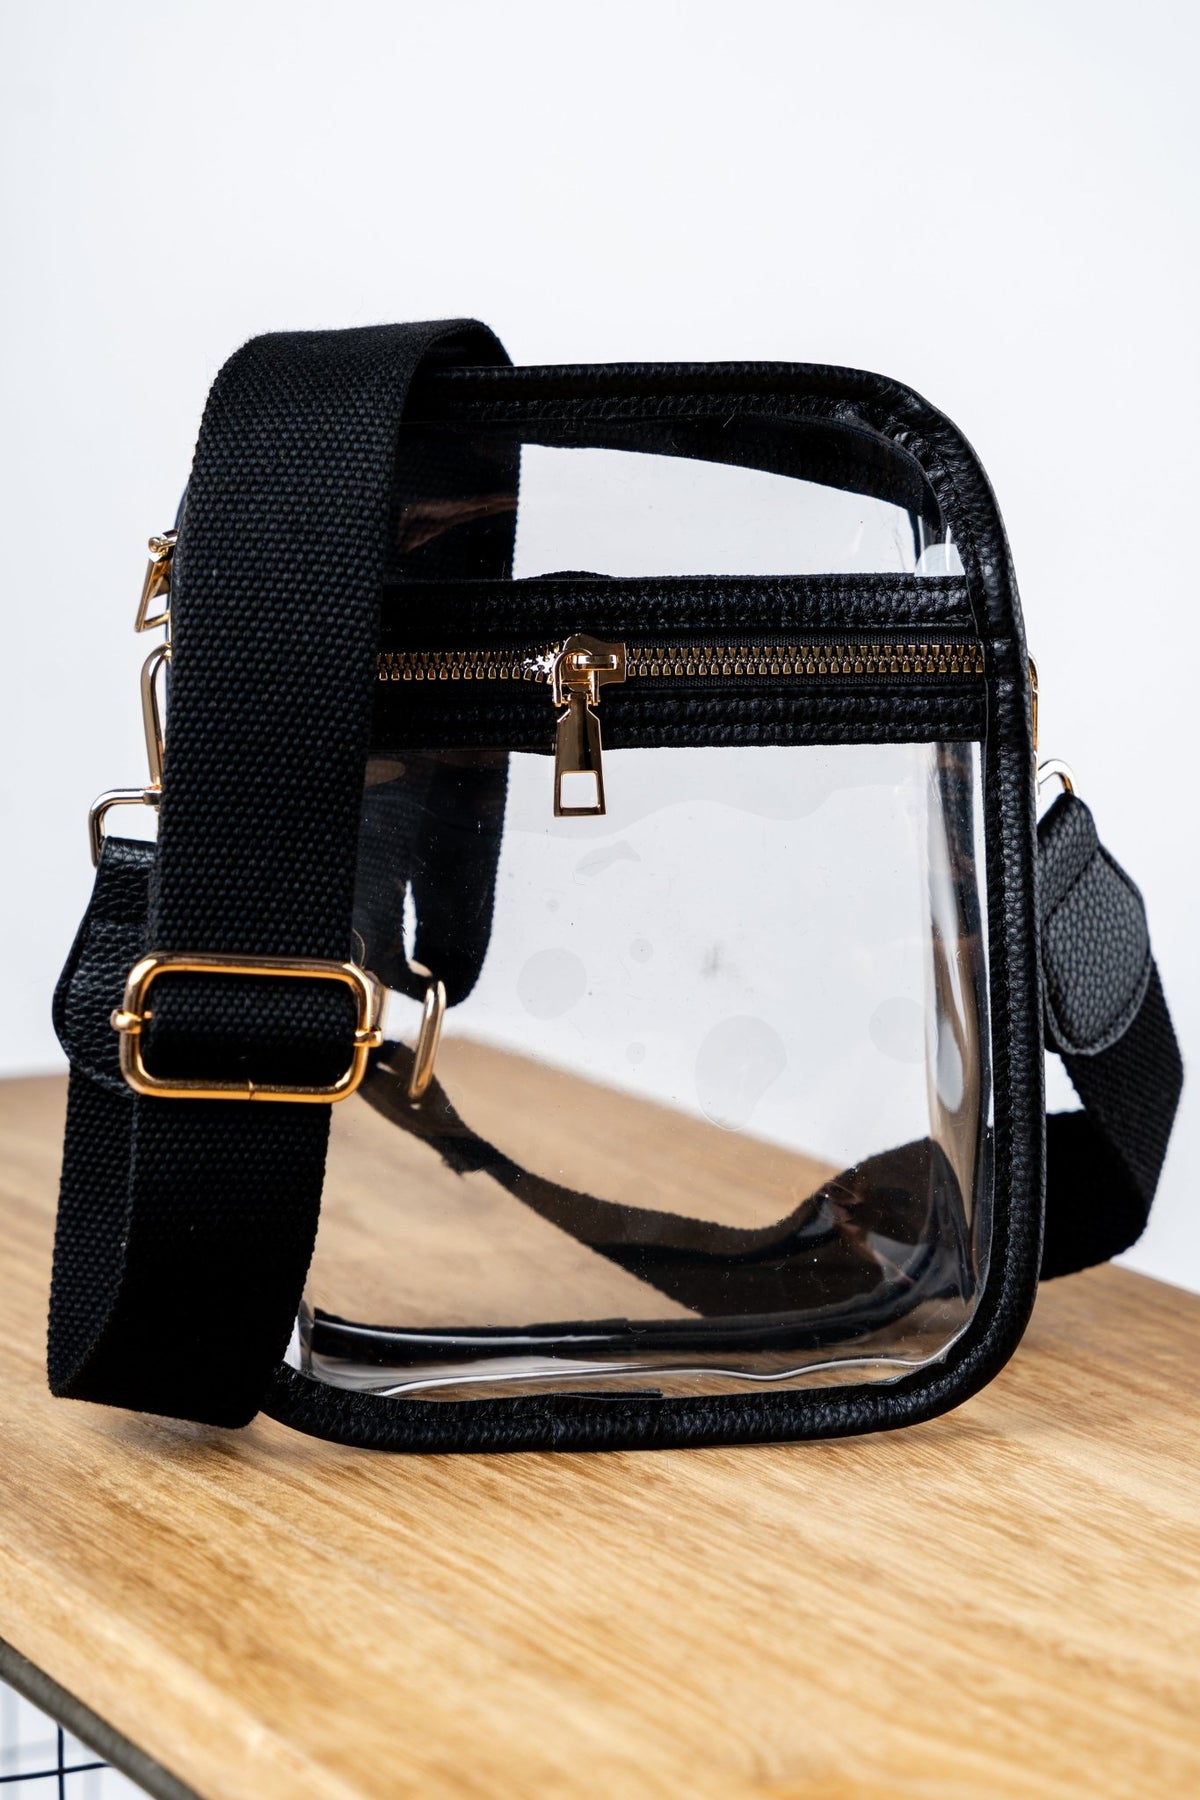 Clear crossbody stadium purse black - Trendy Bags at Lush Fashion Lounge Boutique in Oklahoma City